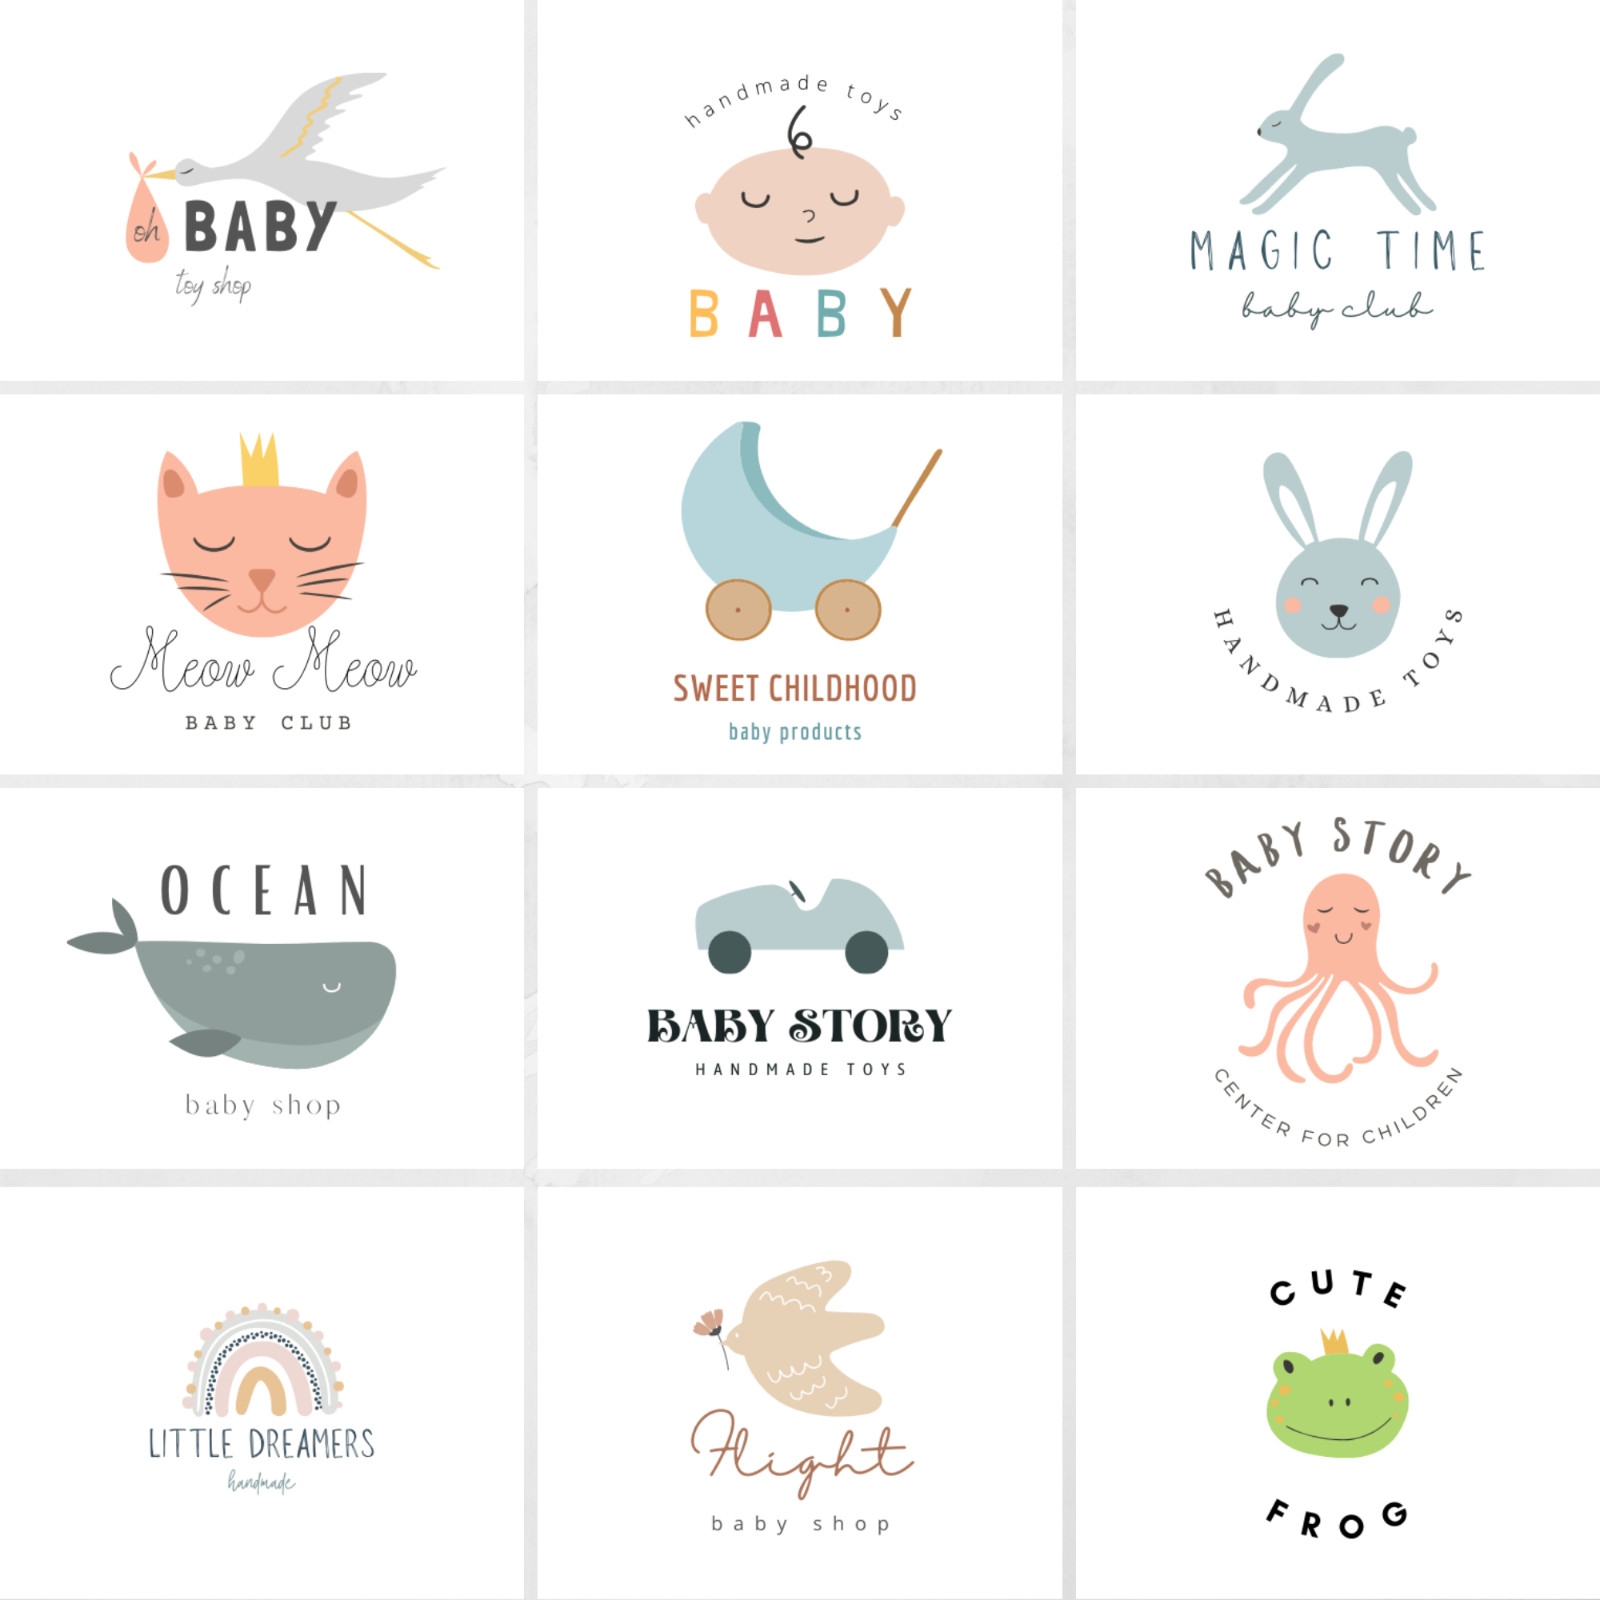 Custom Minimalist Logos For Baby/toddler Business - Baby Boutique - Baby Retail